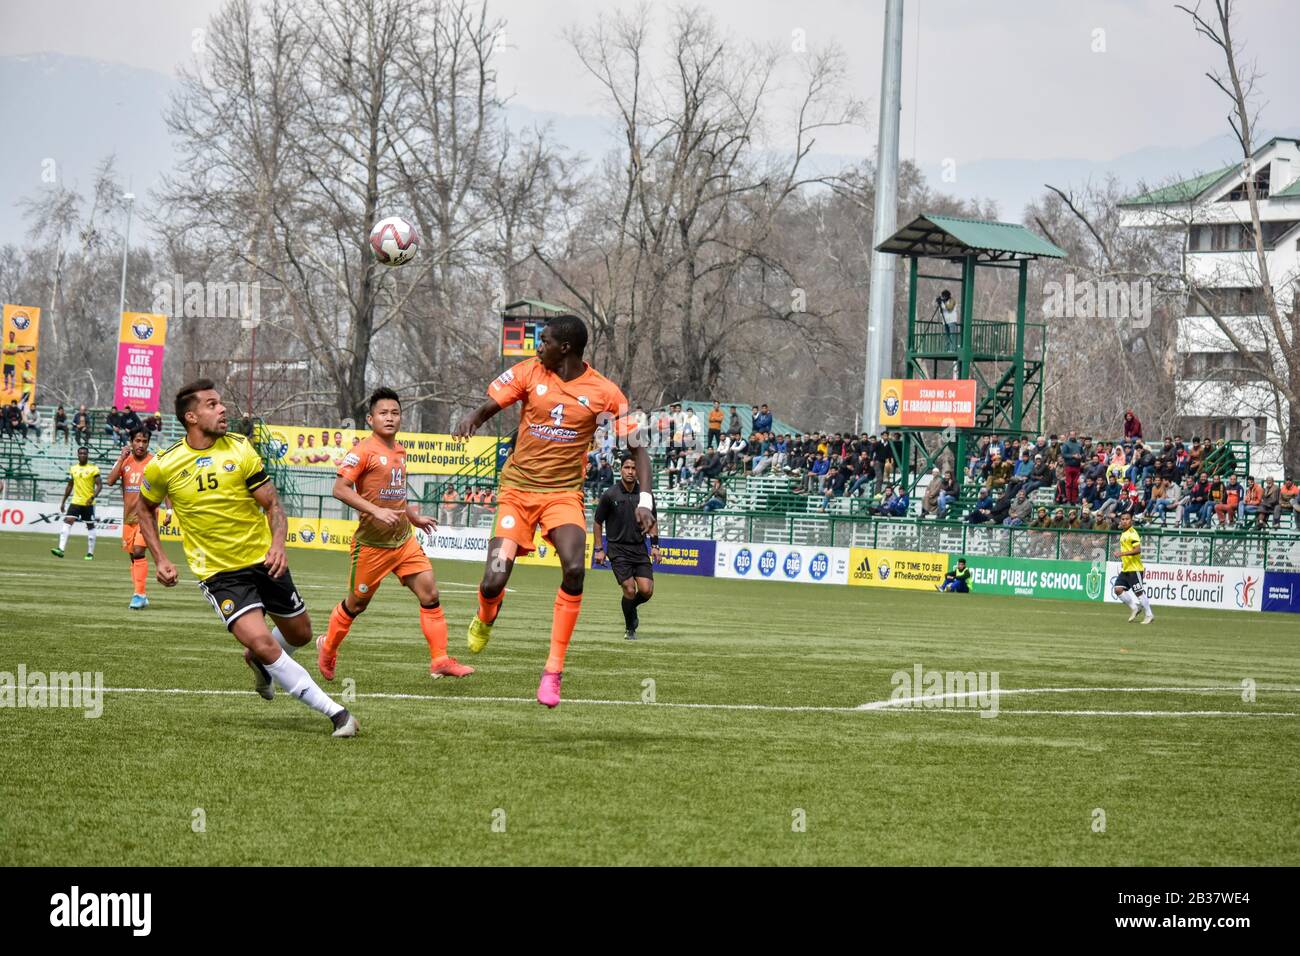 Robin Singh (L) of Real Kashmir and Ousmane Diawara (R) of Neroca are seen in action during a football match between Real Kashmir Football Club (FC) and NEROCA at TRC Srinagar.(Final score; Real Kashmir Football FC 1:0 NEROCA) Stock Photo